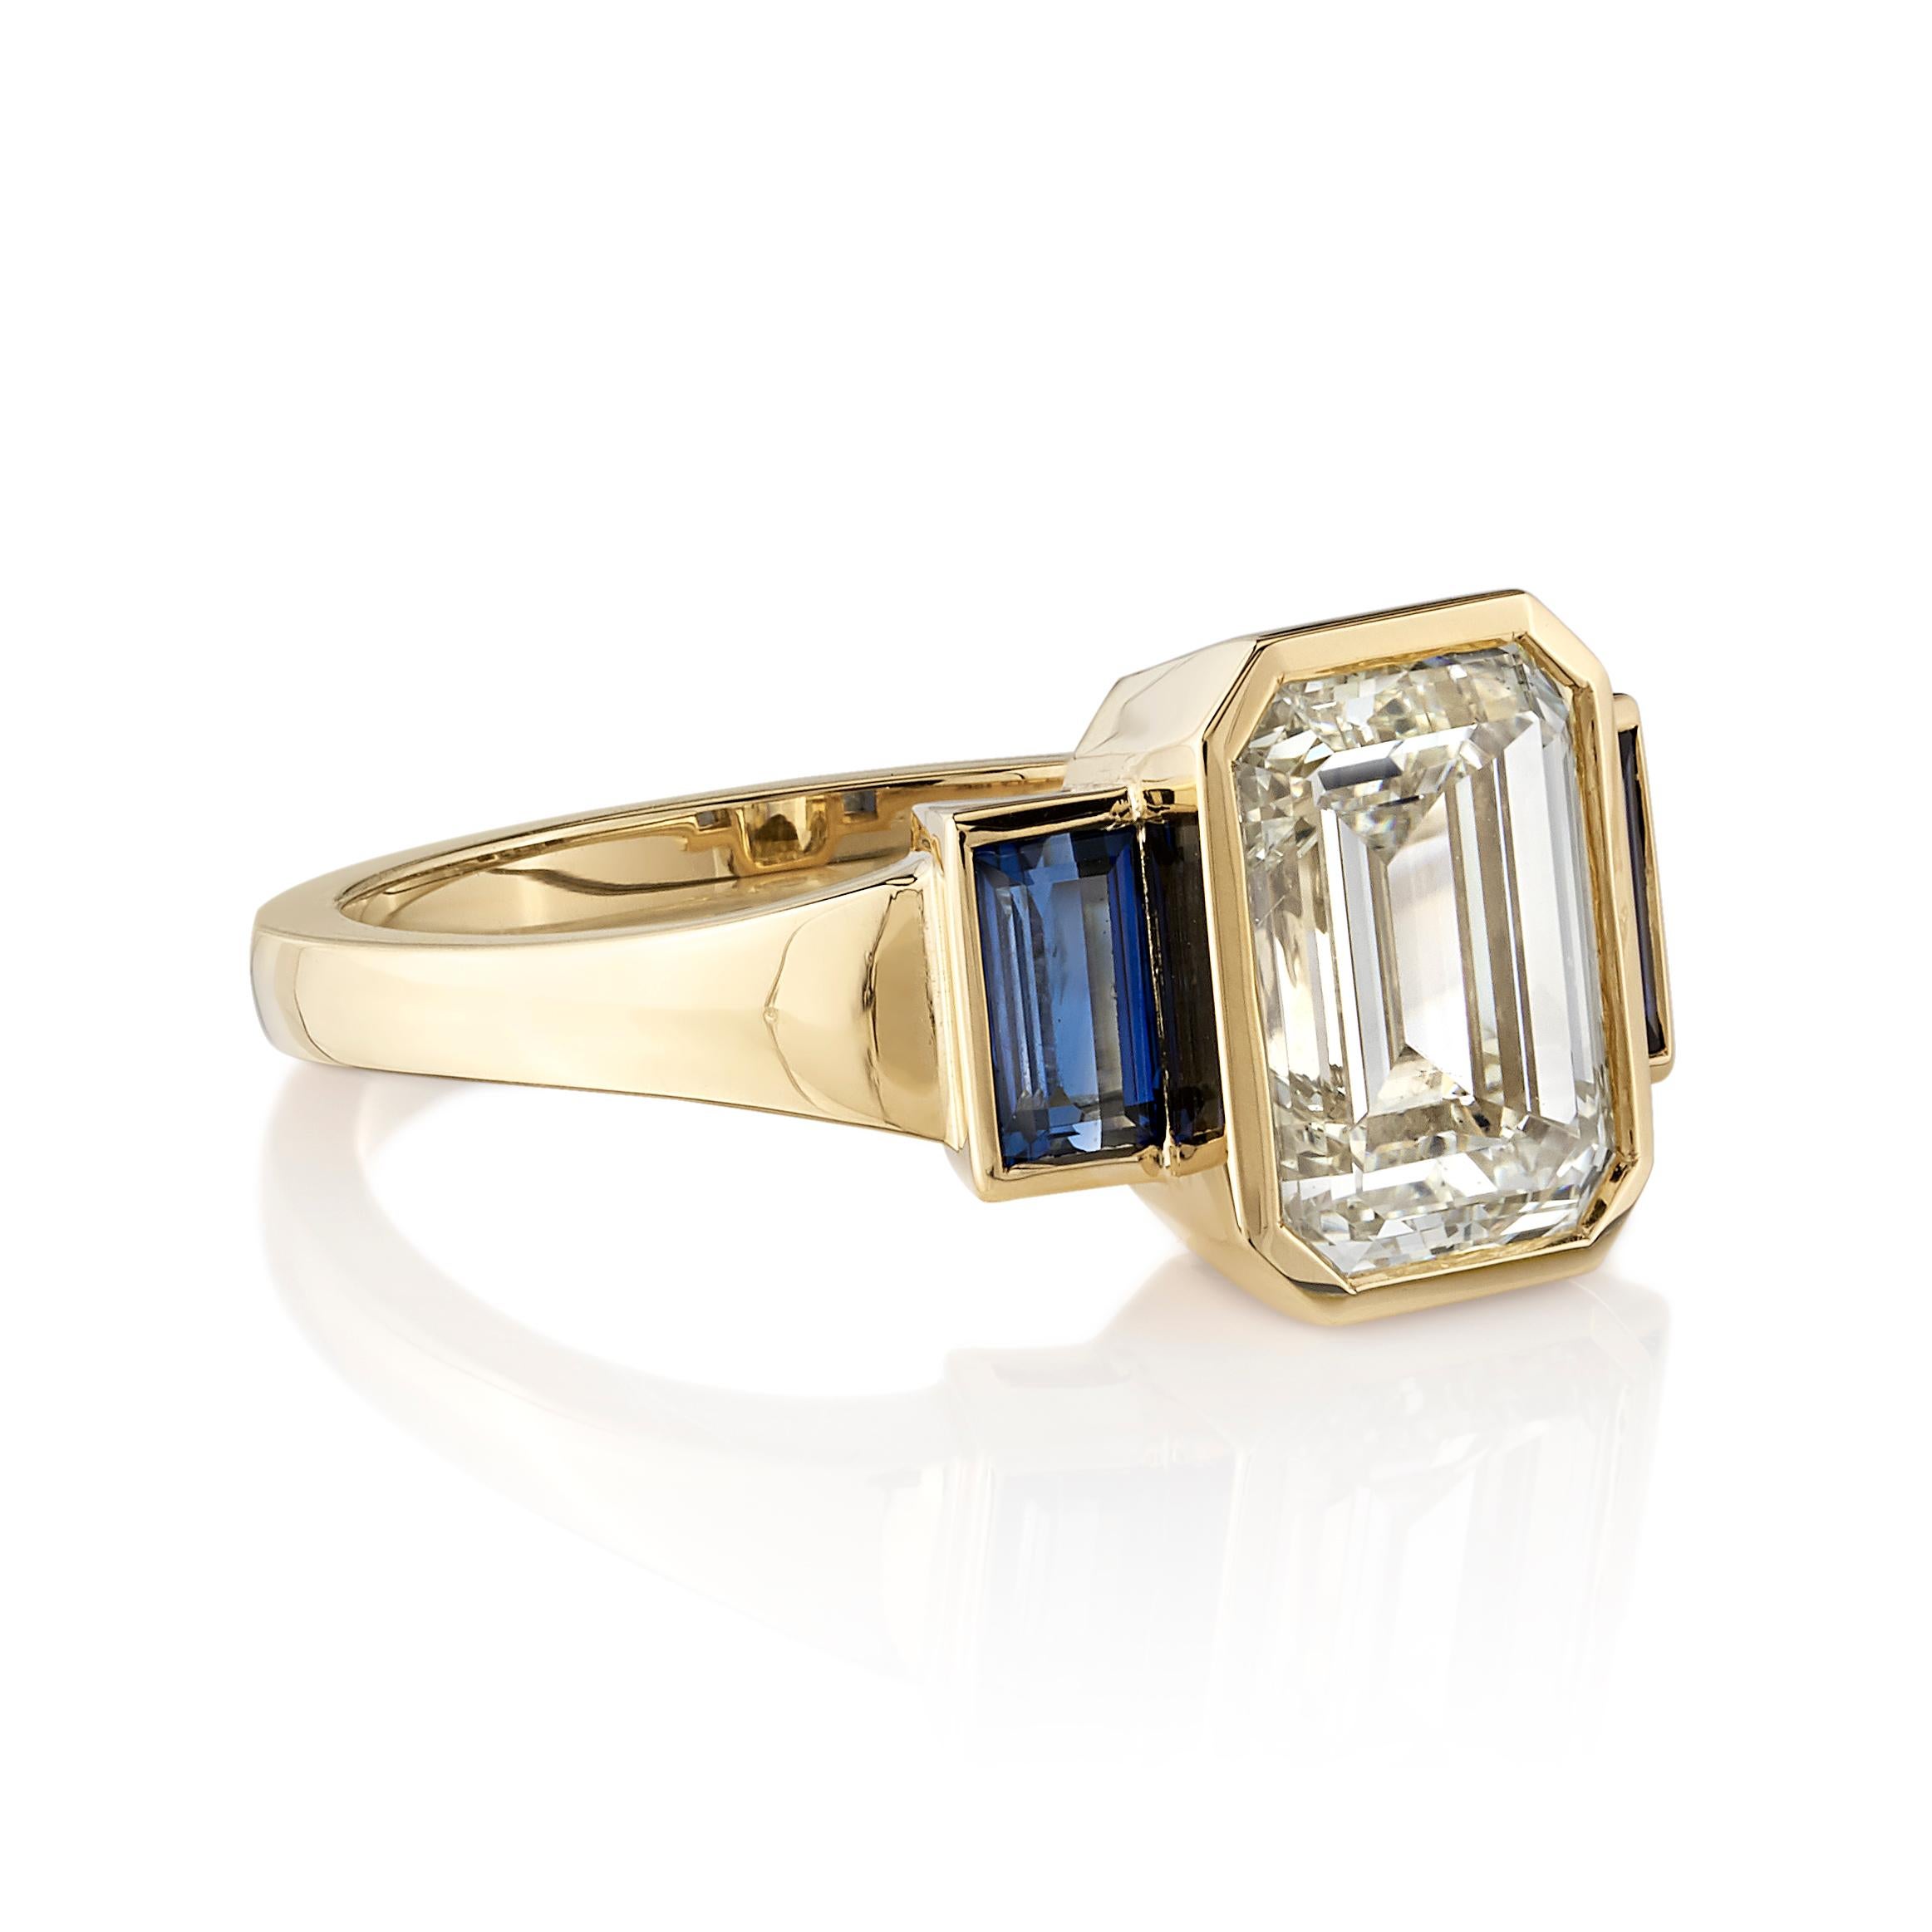 2.23ct Q-R/VS2 GIA certified emerald cut diamond with 0.50ctw baguette cut blue sapphires bezel set in a handcrafted 18K yellow gold mounting. 